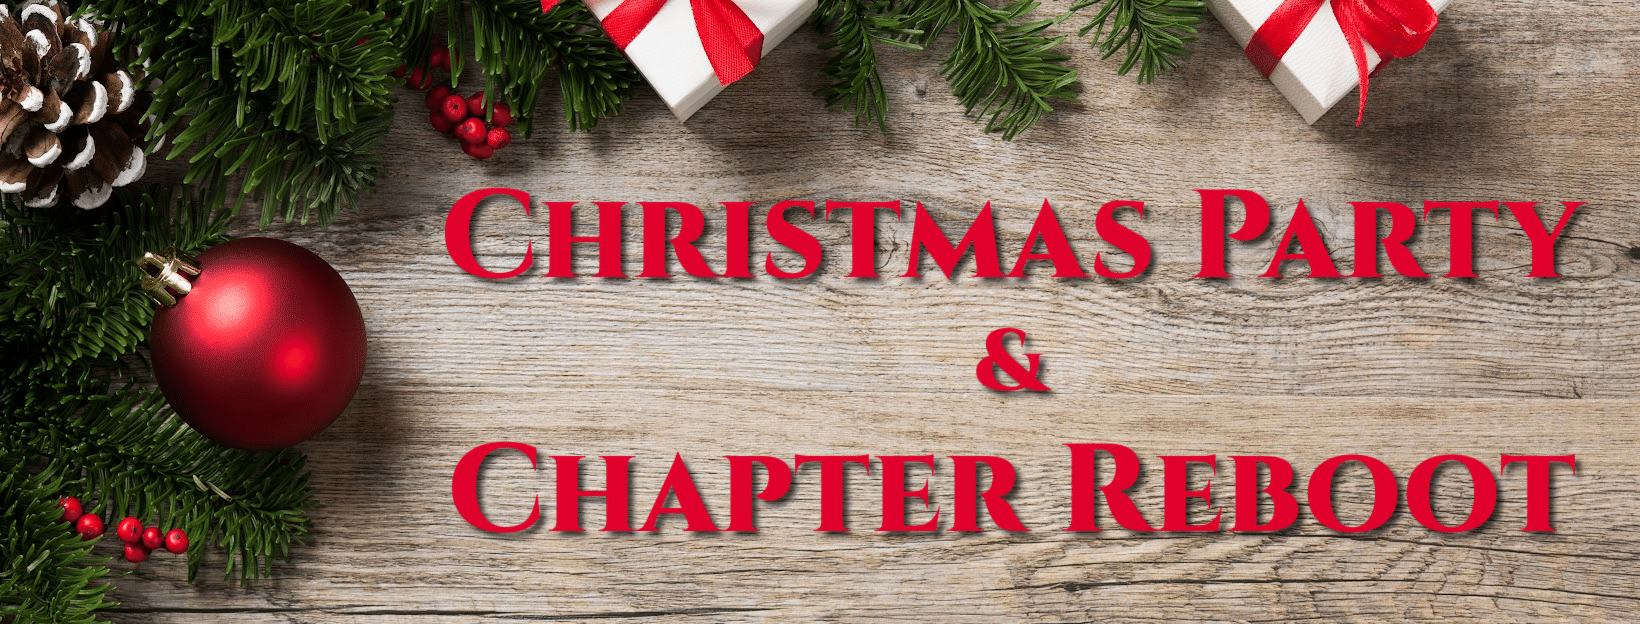 IWN Wisconsin Chapter Christmas Party & Chapter Reboot